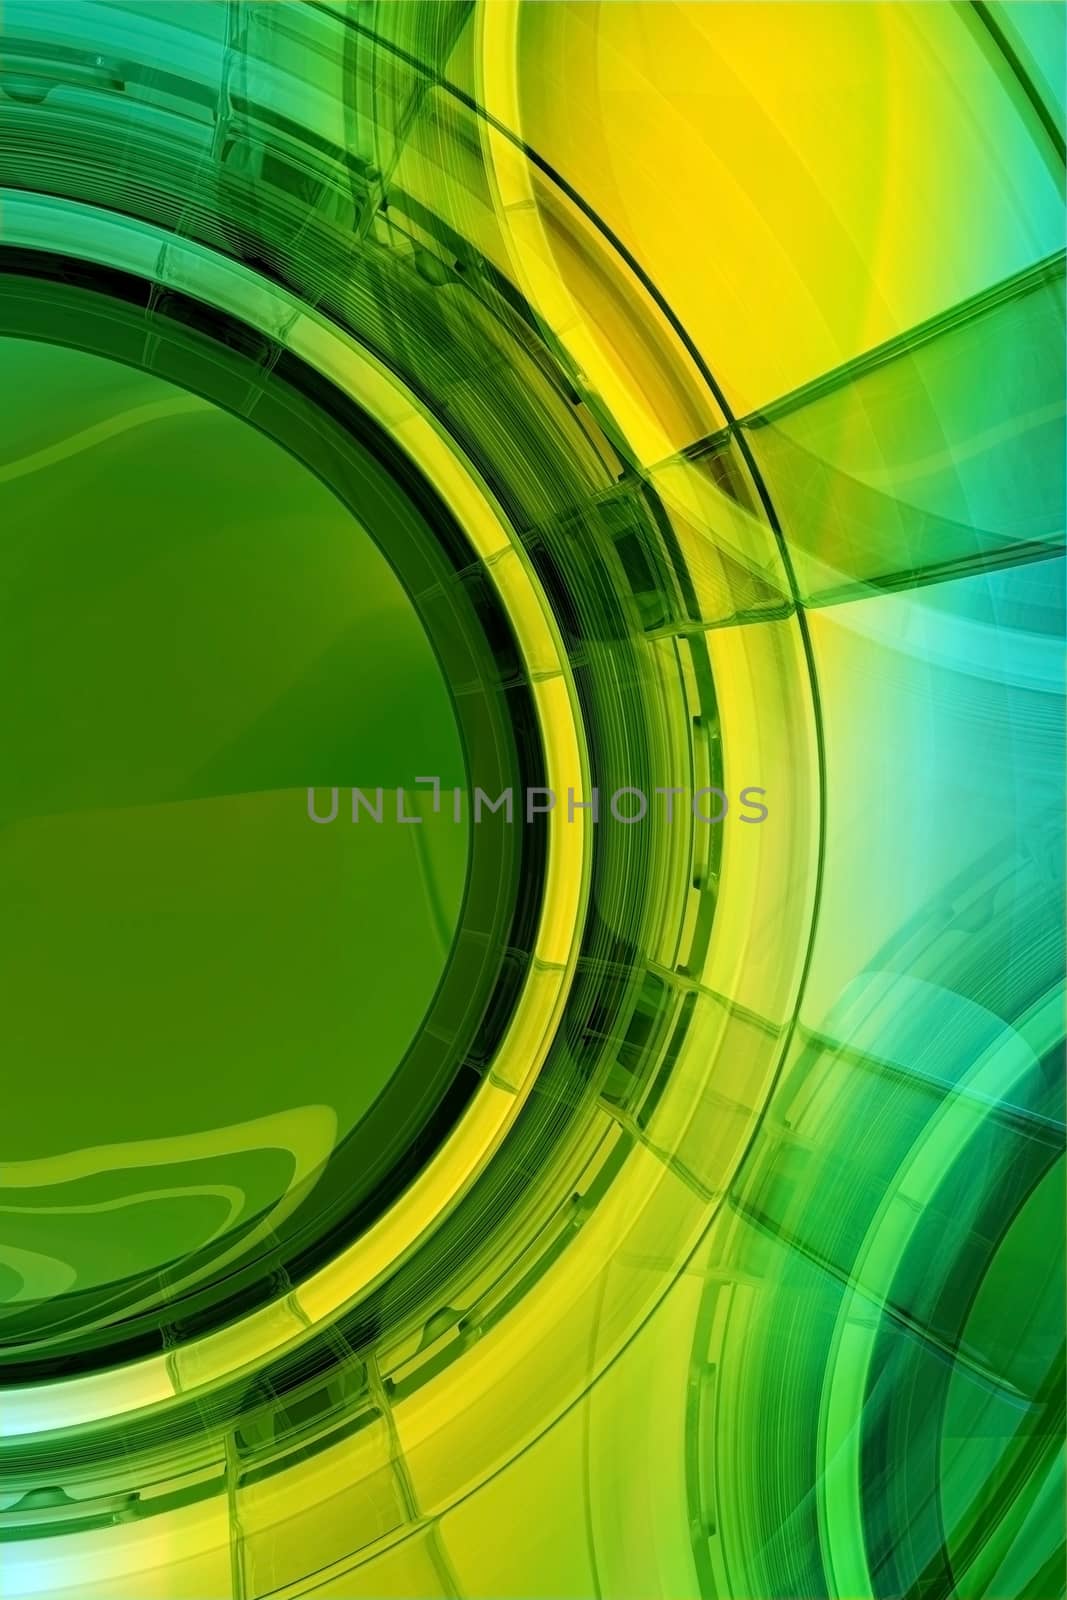 Abstract Glassy Yellow-Green Background. 3D Render illustration. Cool Vertical Corporate Background Design.